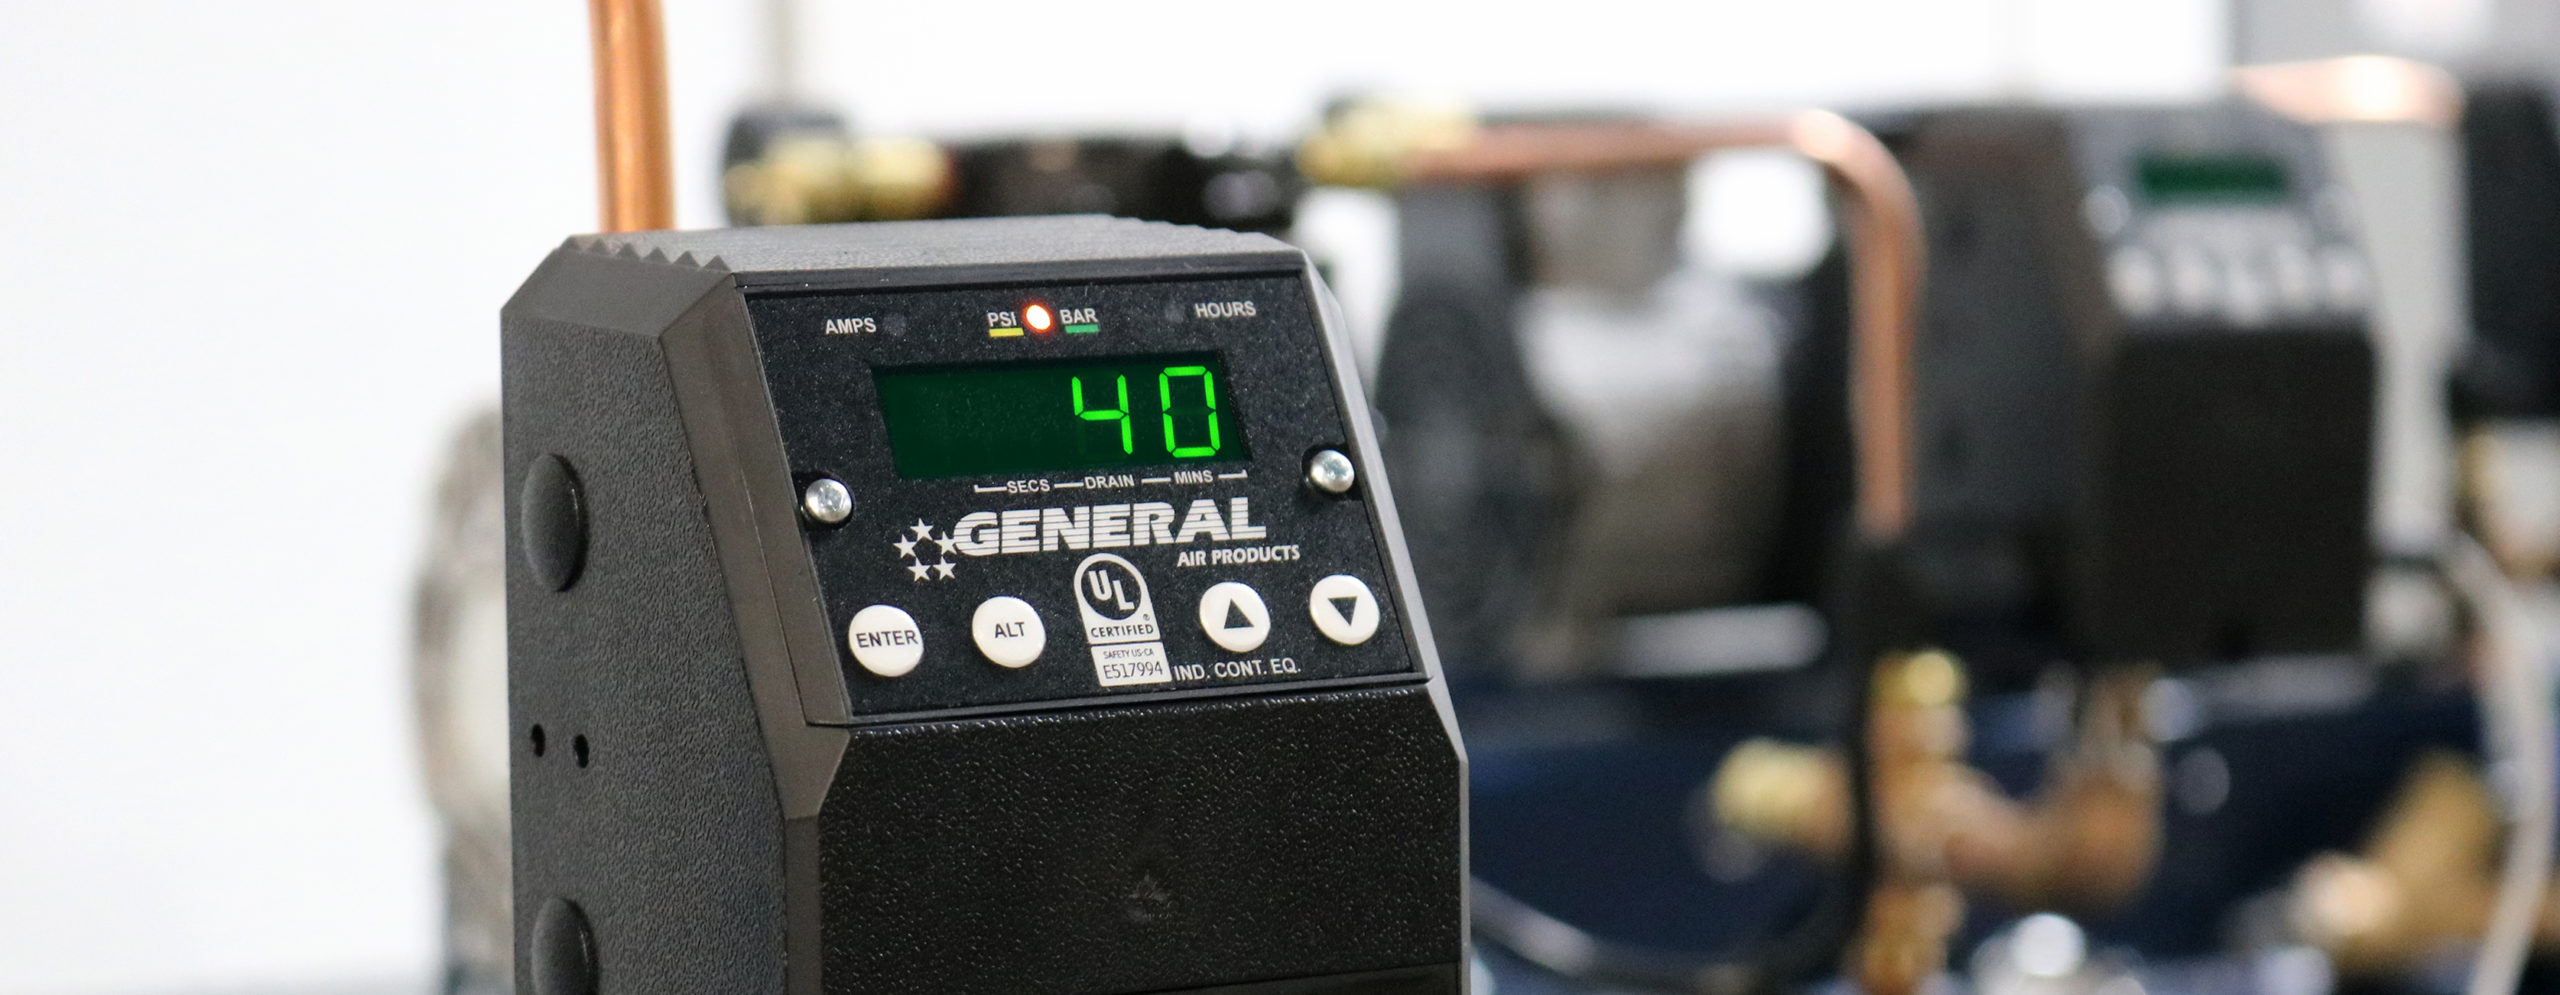 a digital device that says general on it